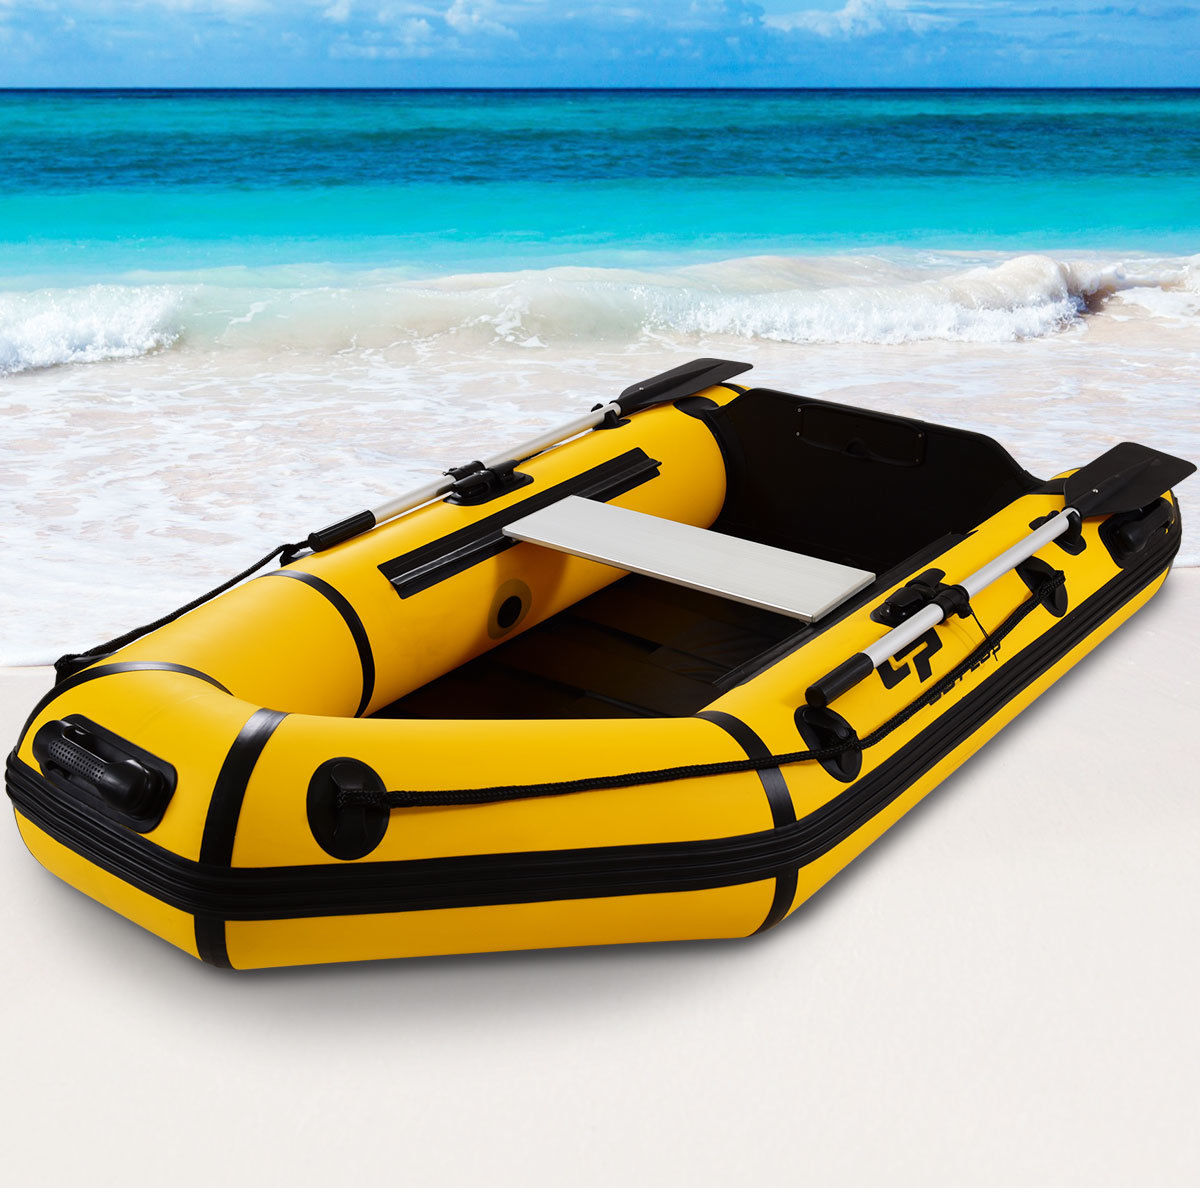 Goplus 2 Person 7.5FT Inflatable Dinghy Boat Fishing Tender Rafting Water (Best Inflatable Fishing Boat)